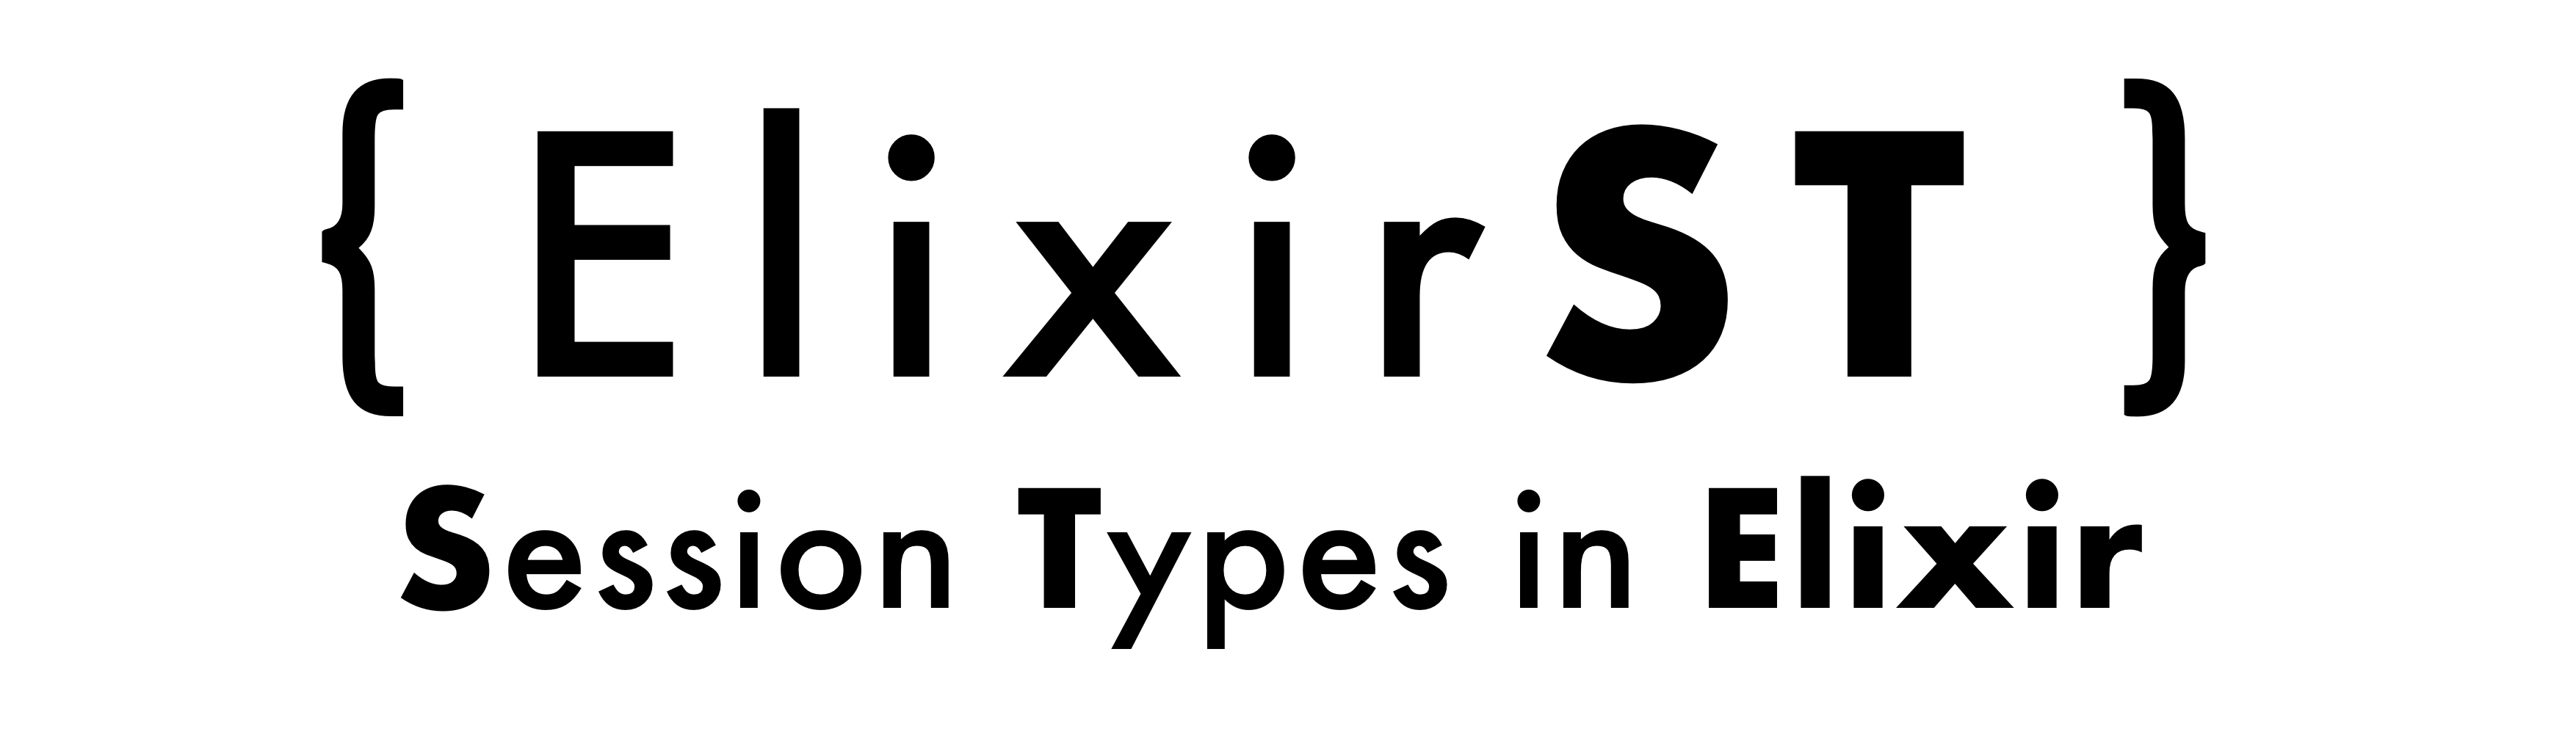 ElixirST: Session Types in Elixir